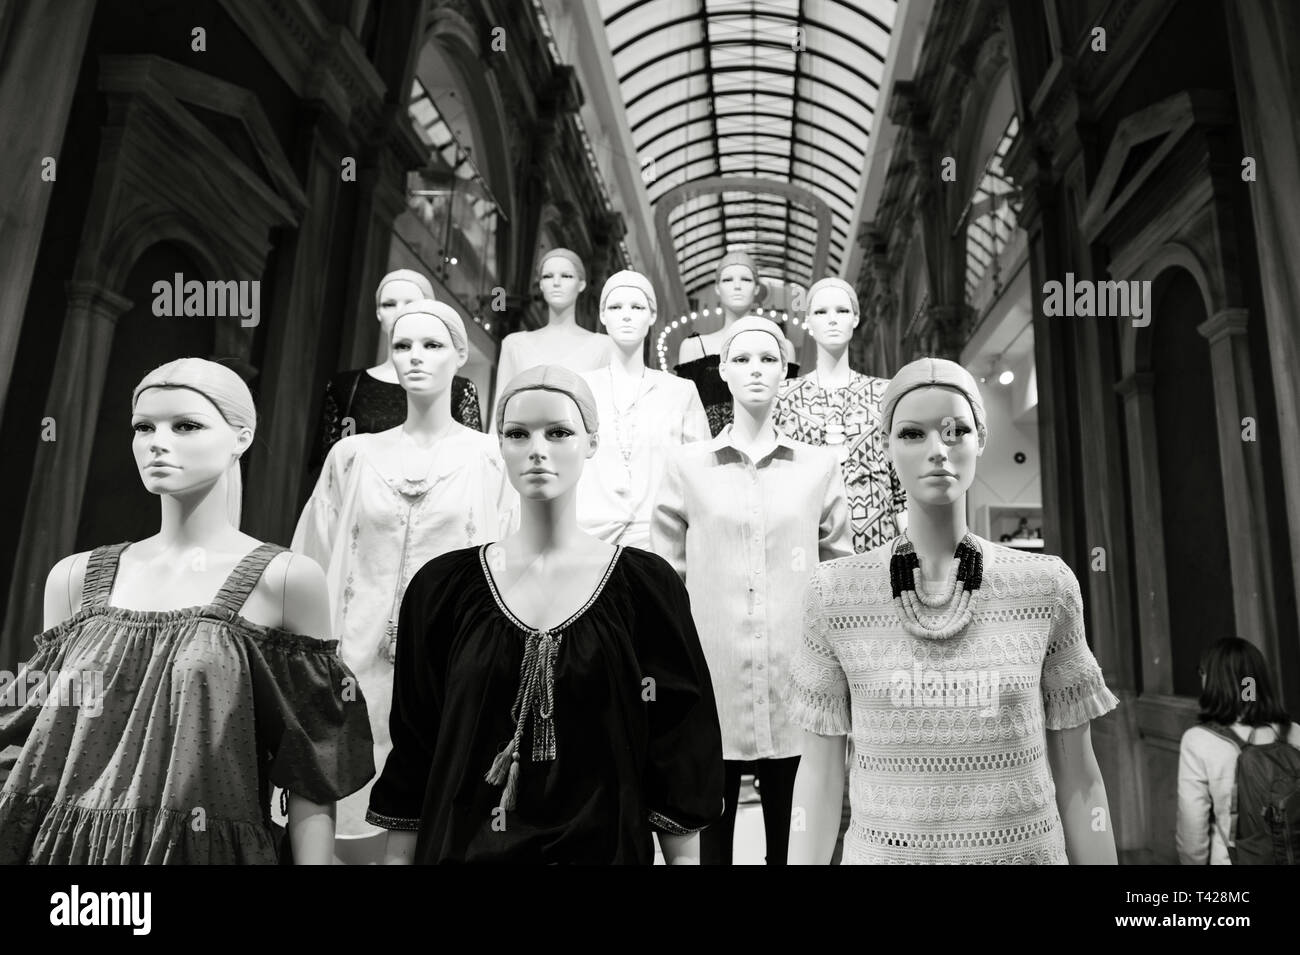 Athens, Greece - 26 Mar 2016: Mannequins wearing H and M fashion clothes  inside store on Ermou 54 street with multiple led lights inside the old  vintage building Stock Photo - Alamy